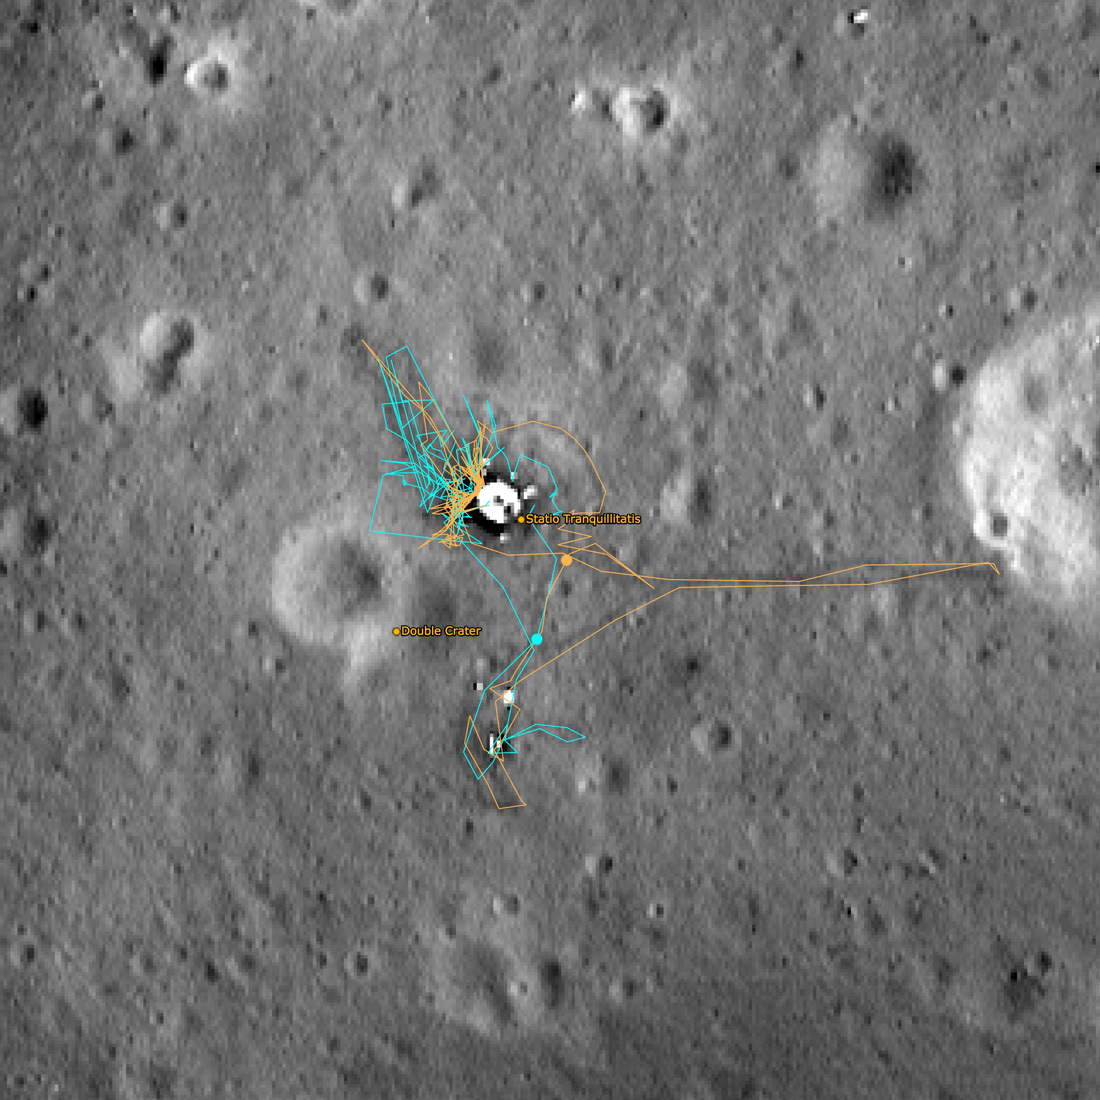 Relive the Apollo 11 surface traverse with th new addition to the LROC Featured Sites webpage....